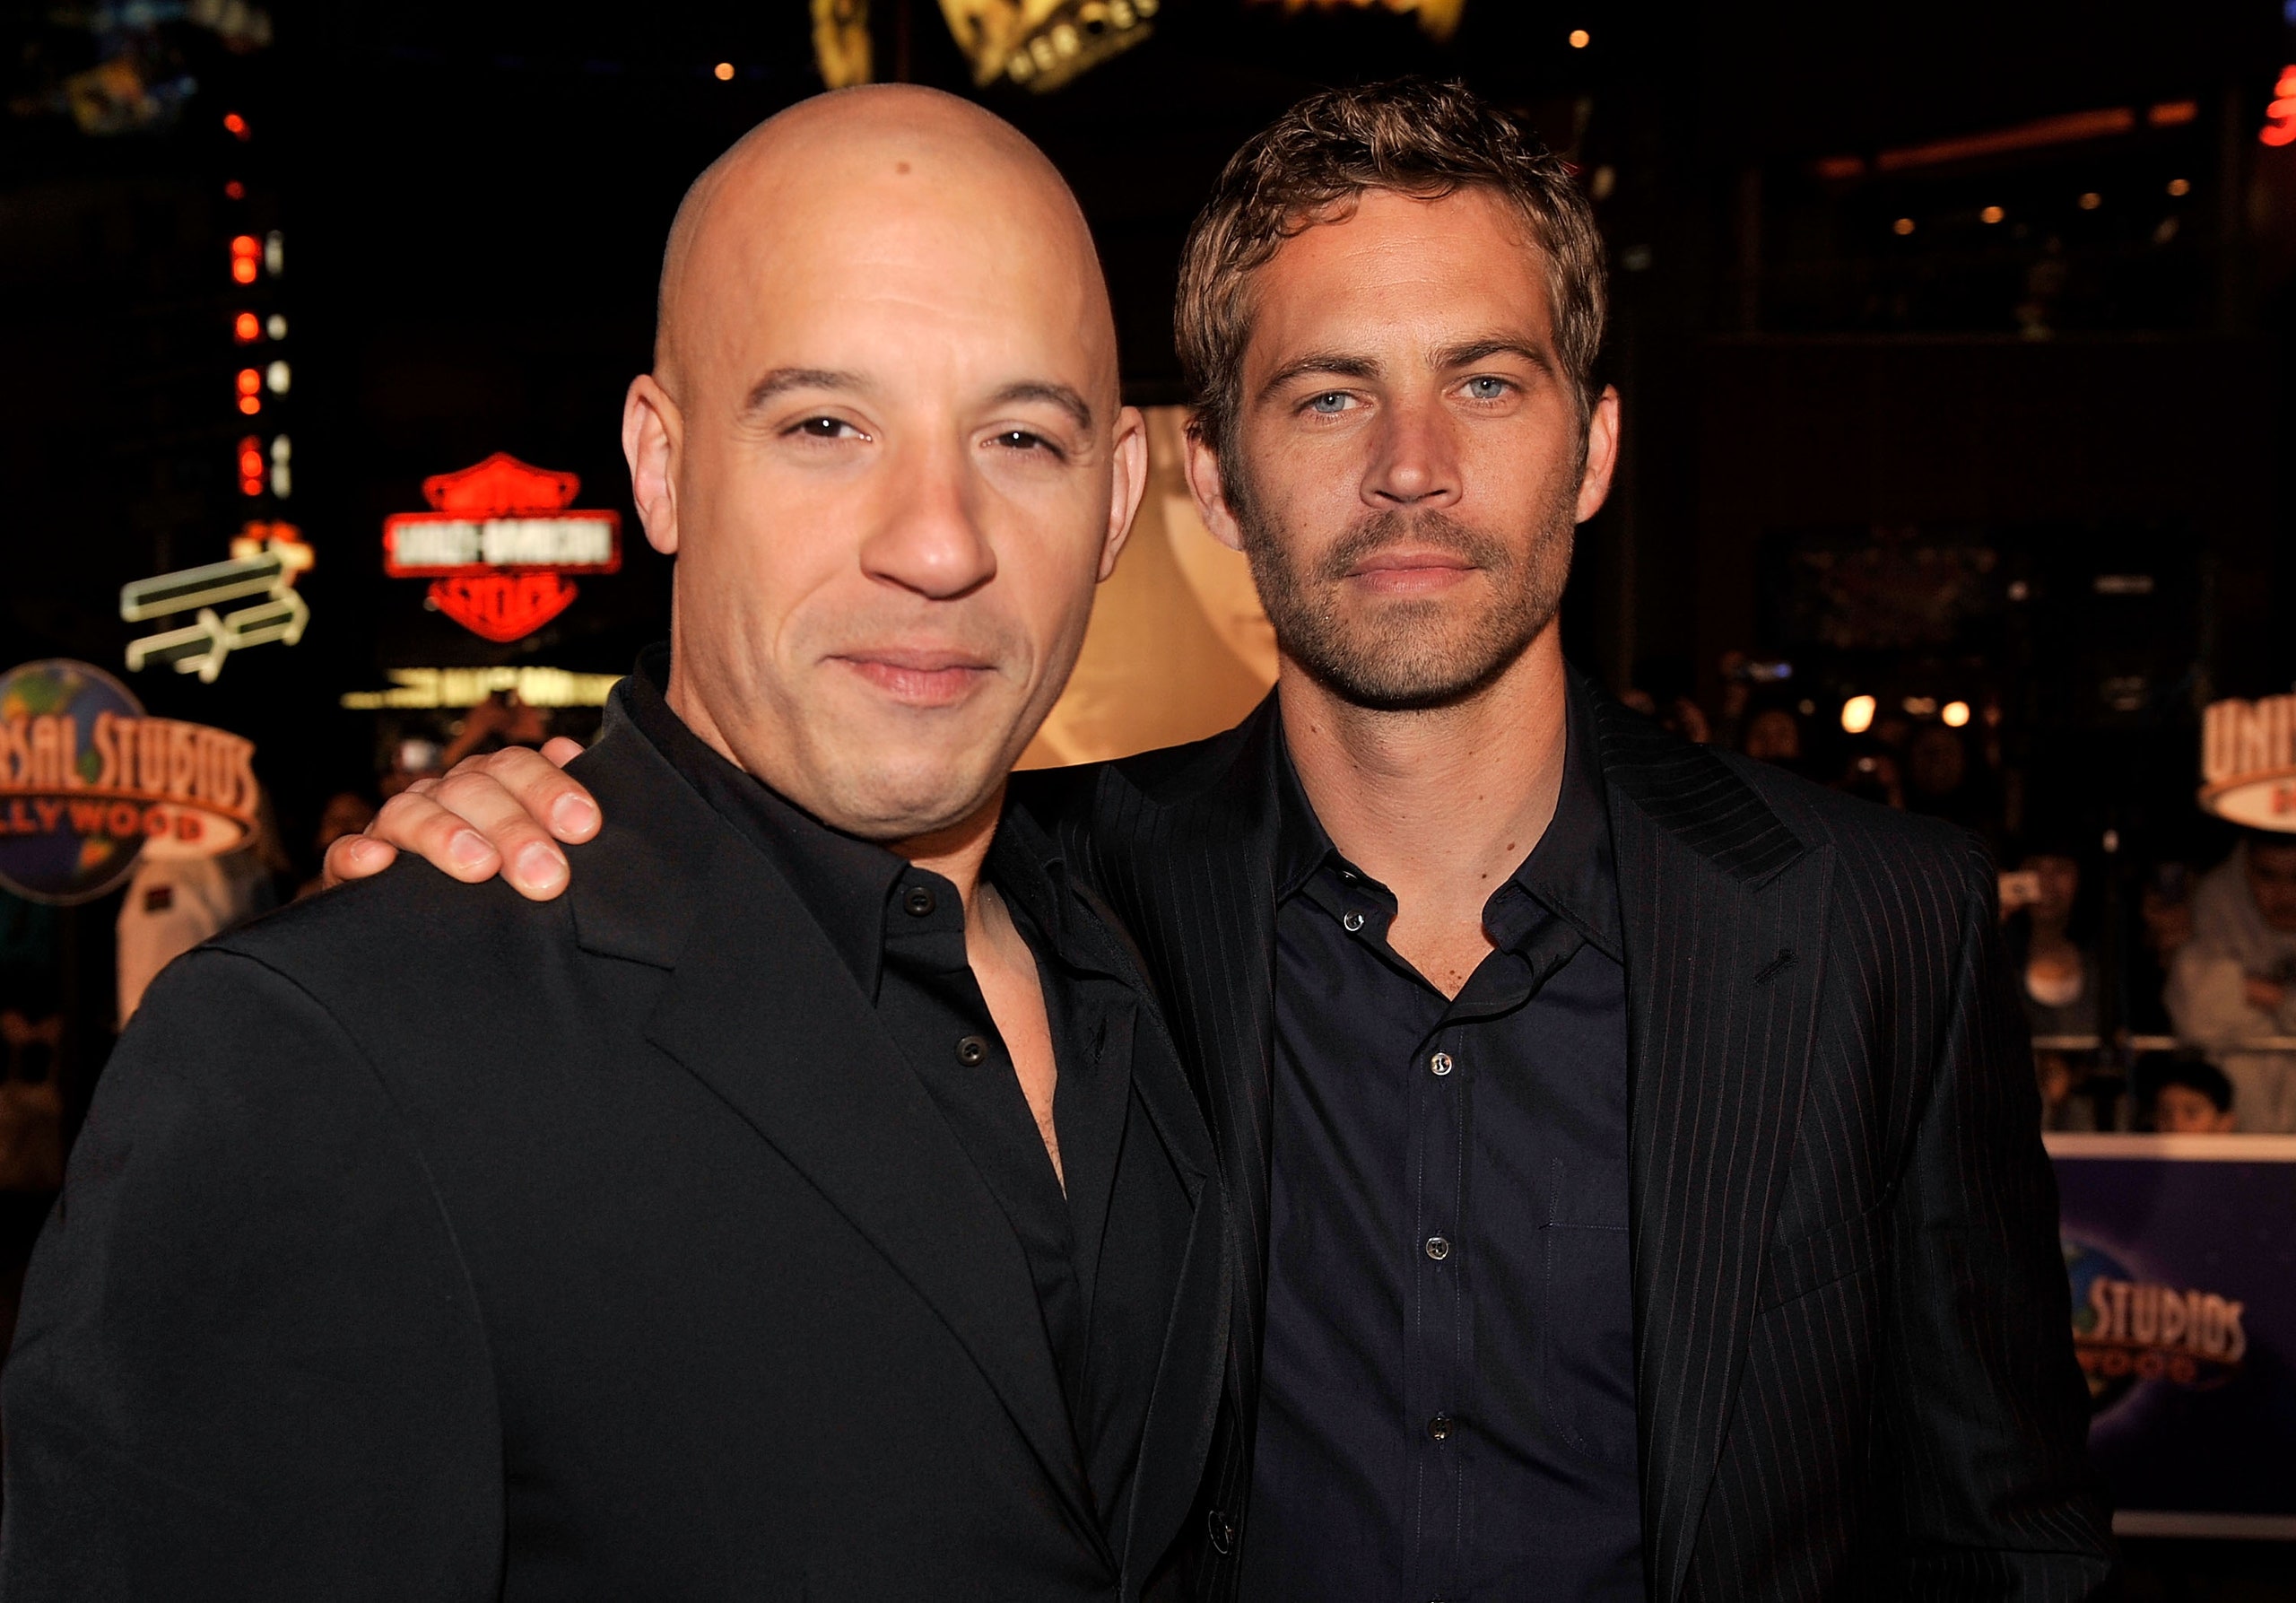 theres Only One Thing To Say About Vin Diesel Walking Paul Walkers Daughter Down The Aisle Vanity Fair